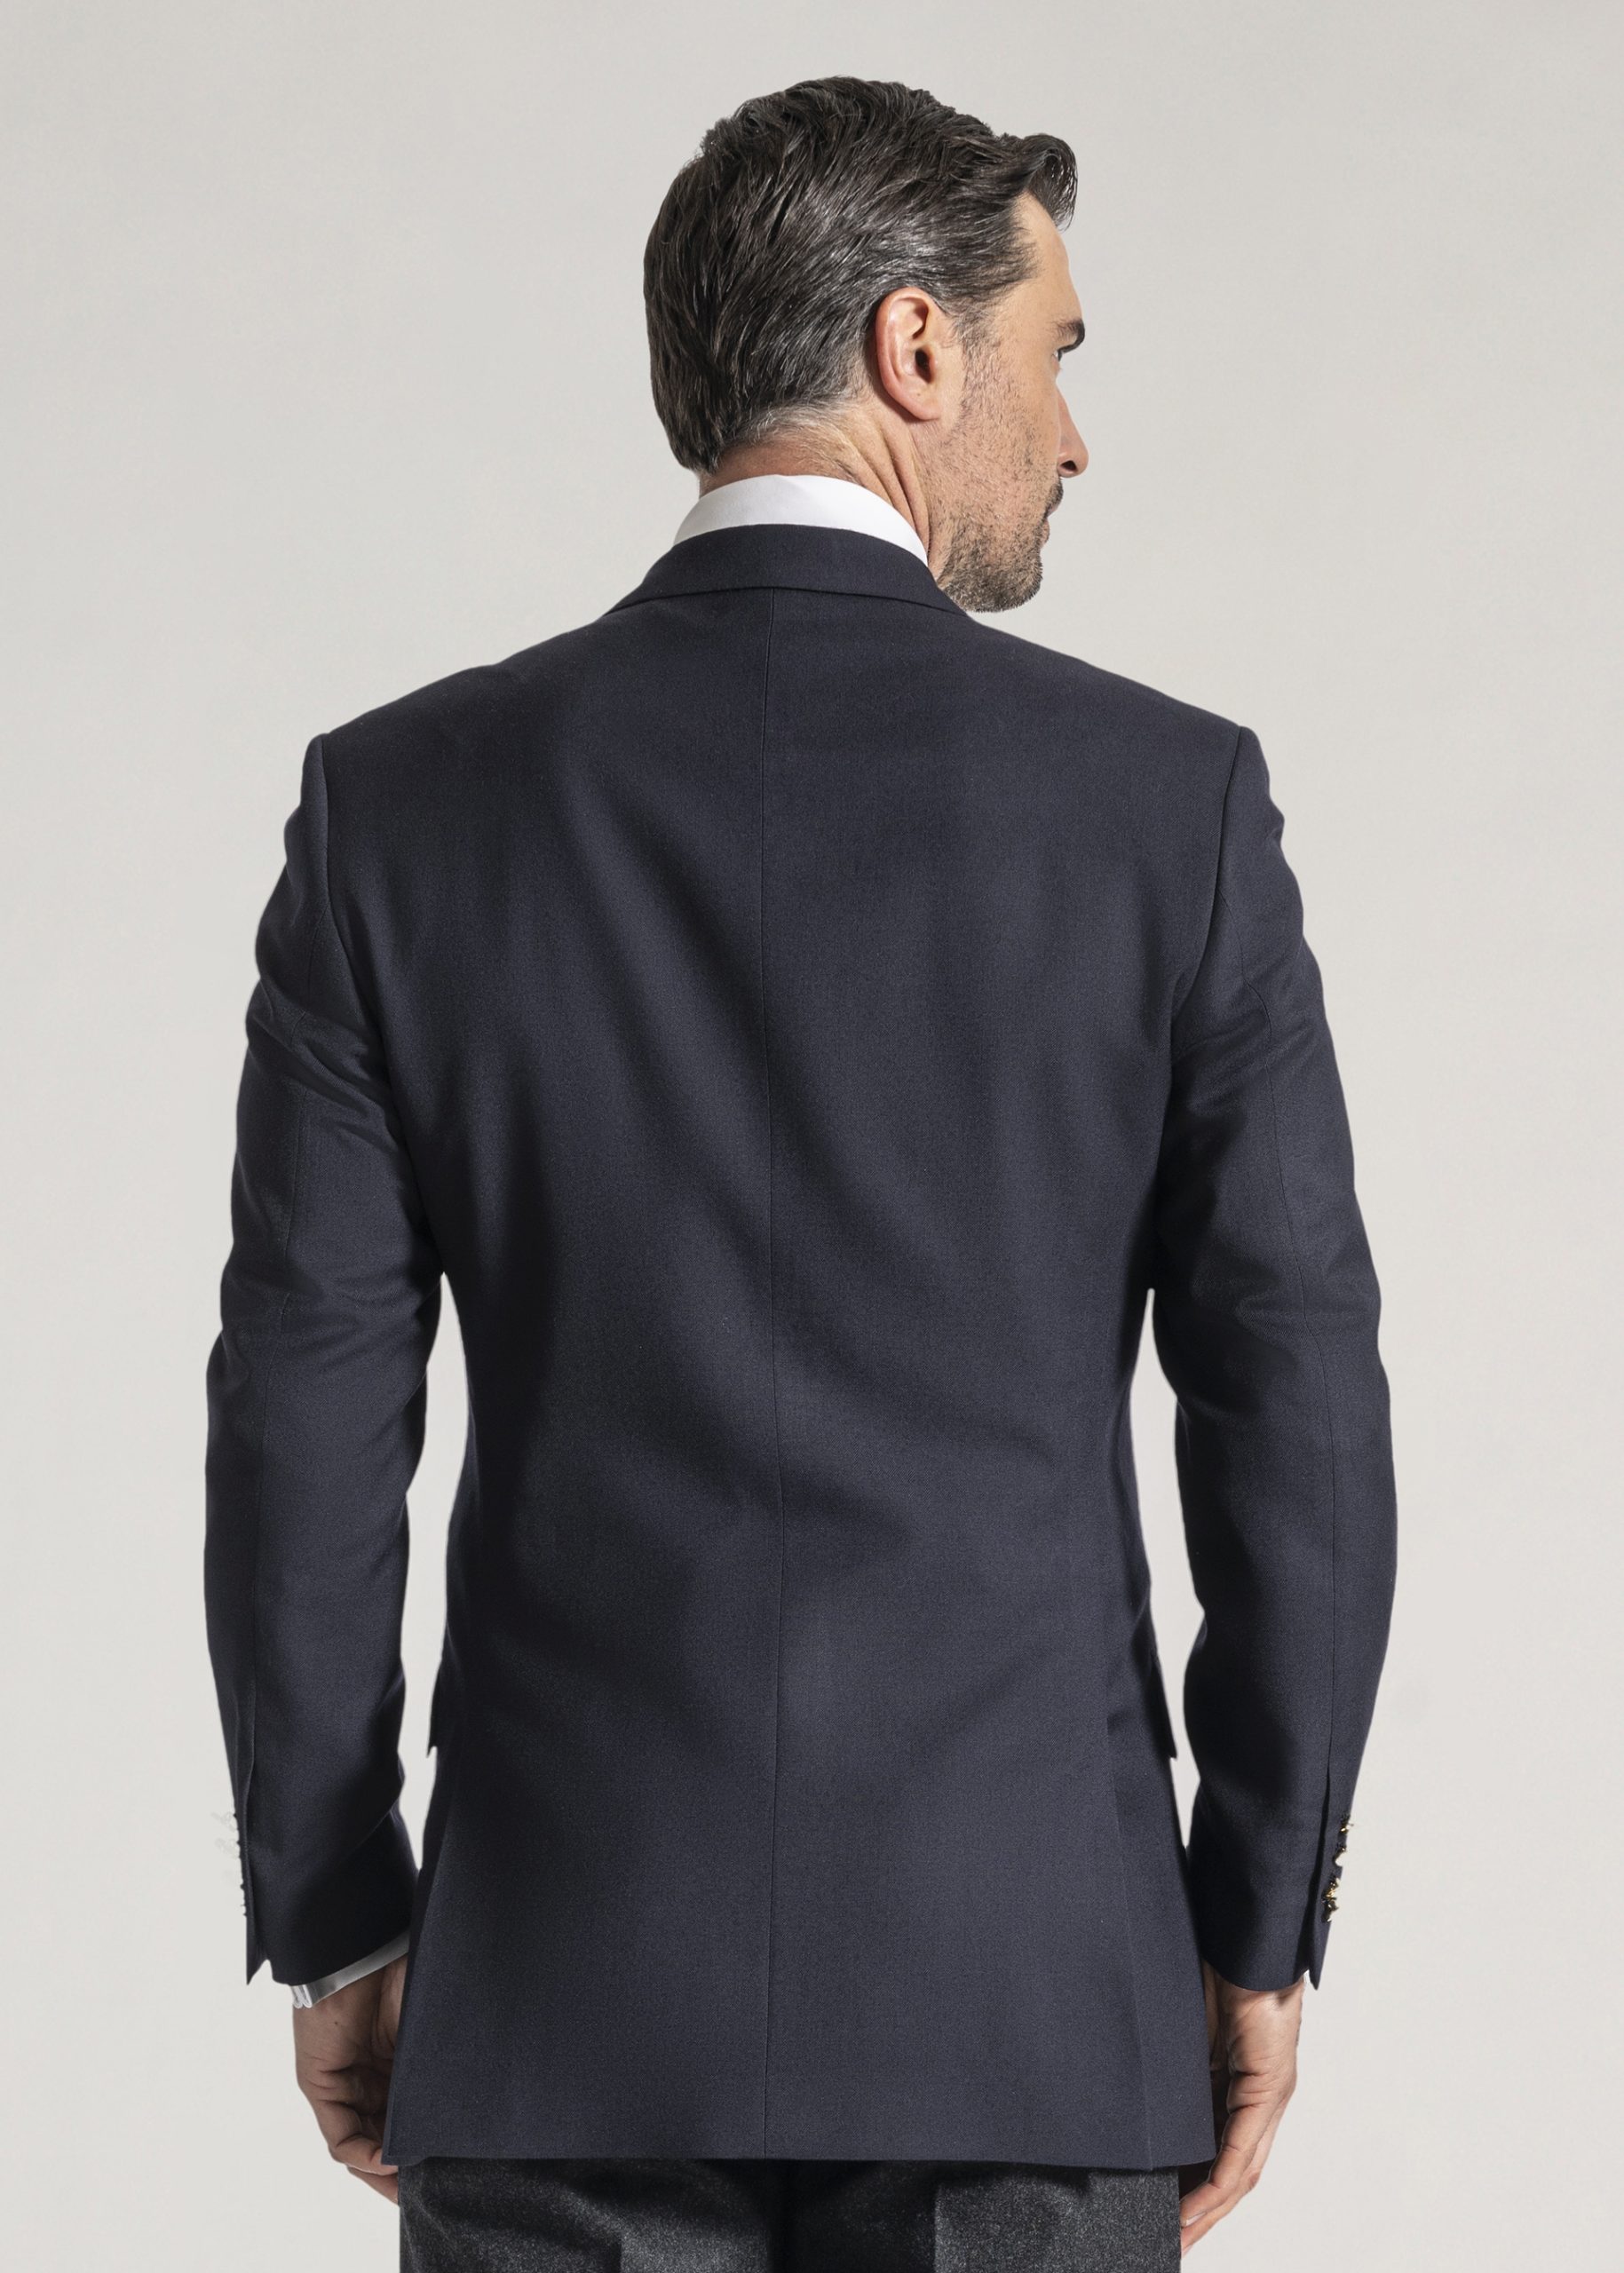 Single breasted navy blazer styled with white shirt